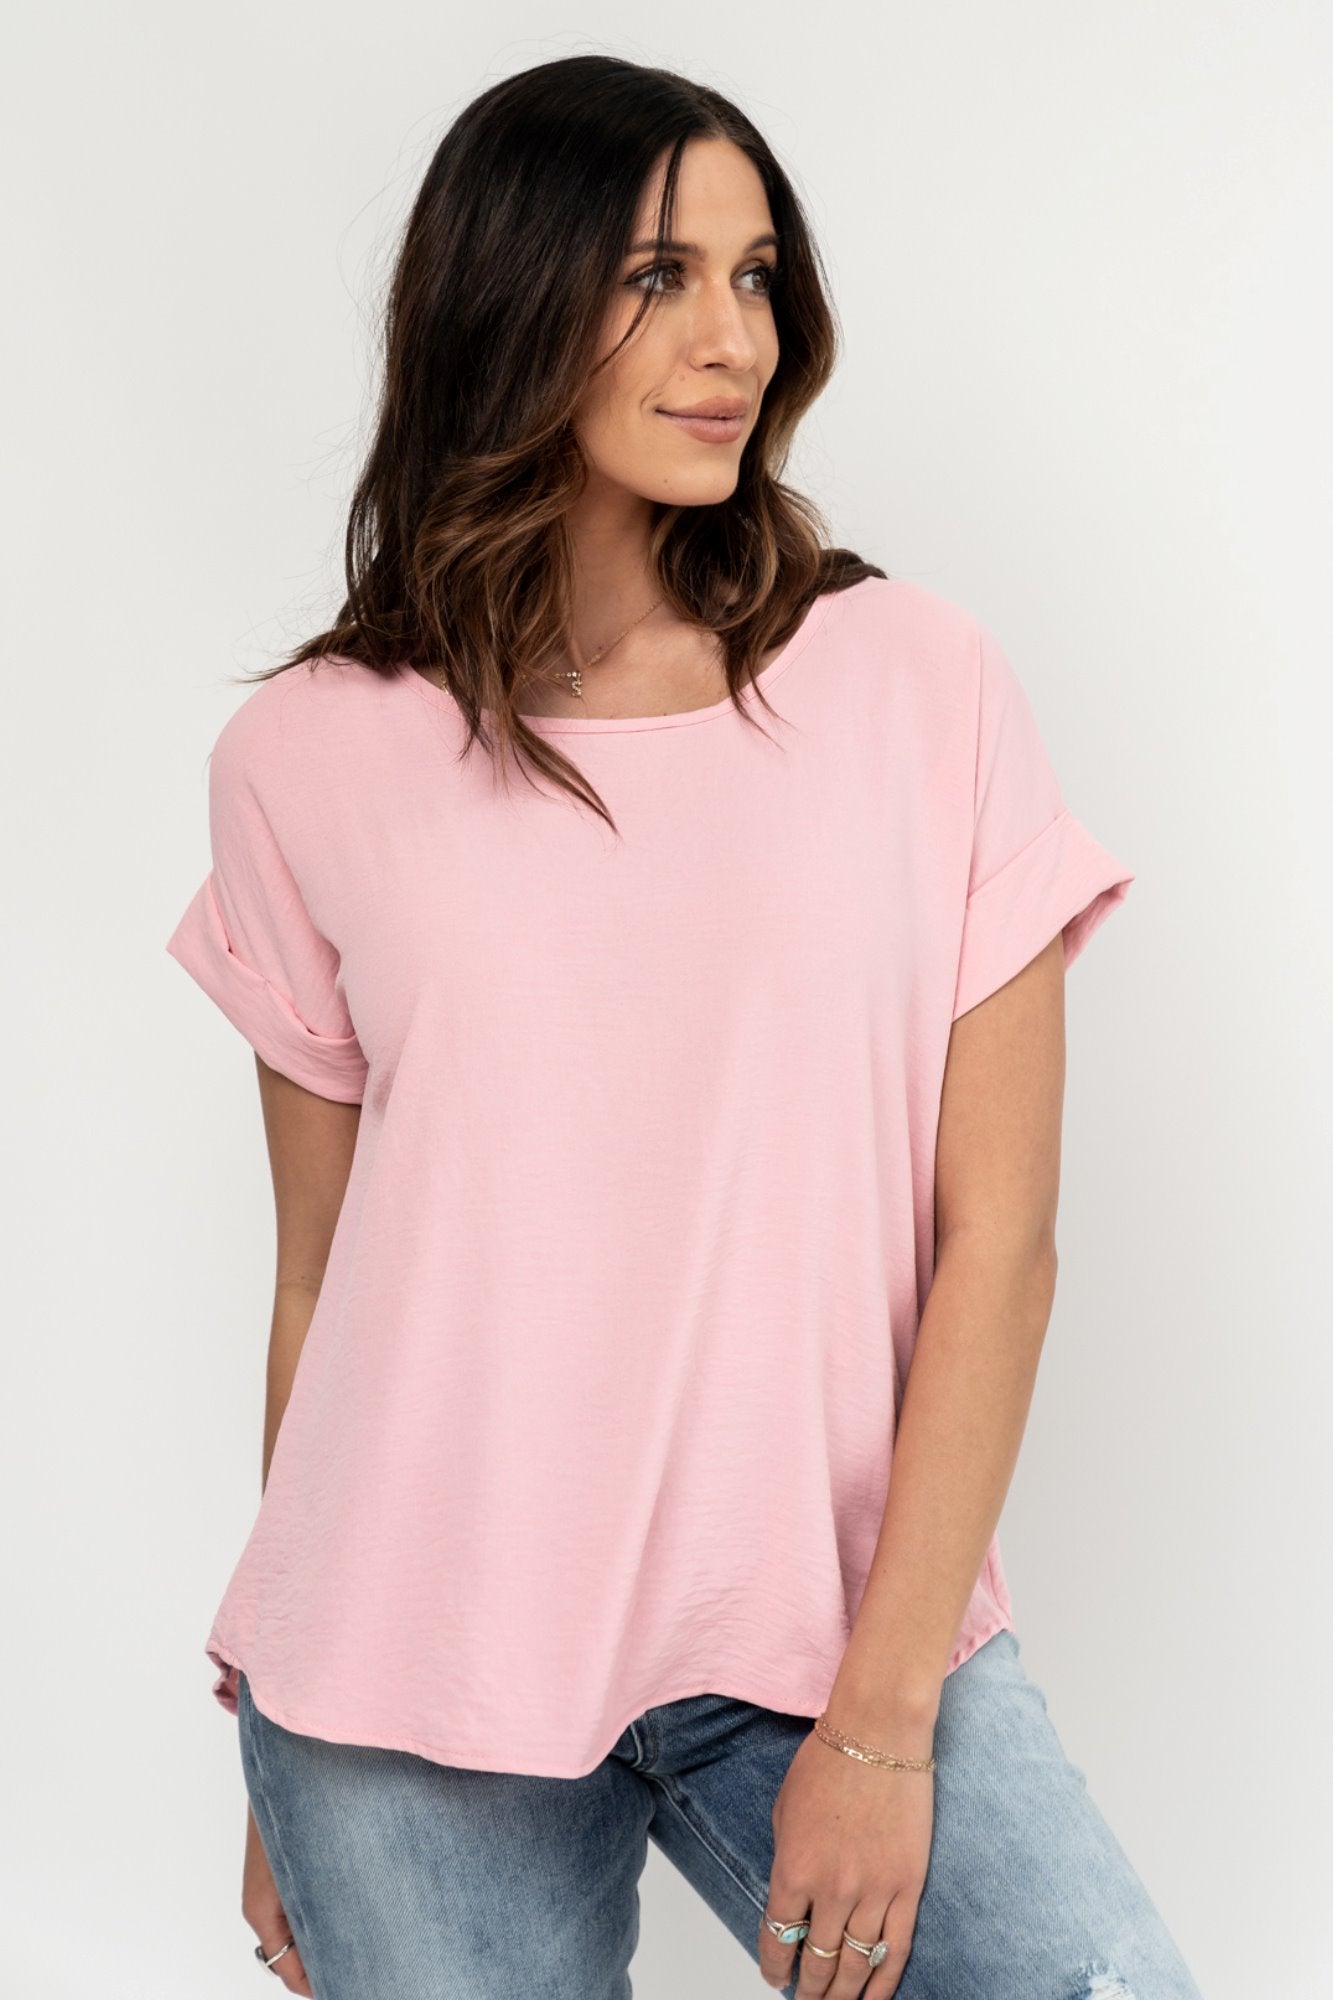 Ella Blouse in Pink Holley Girl 